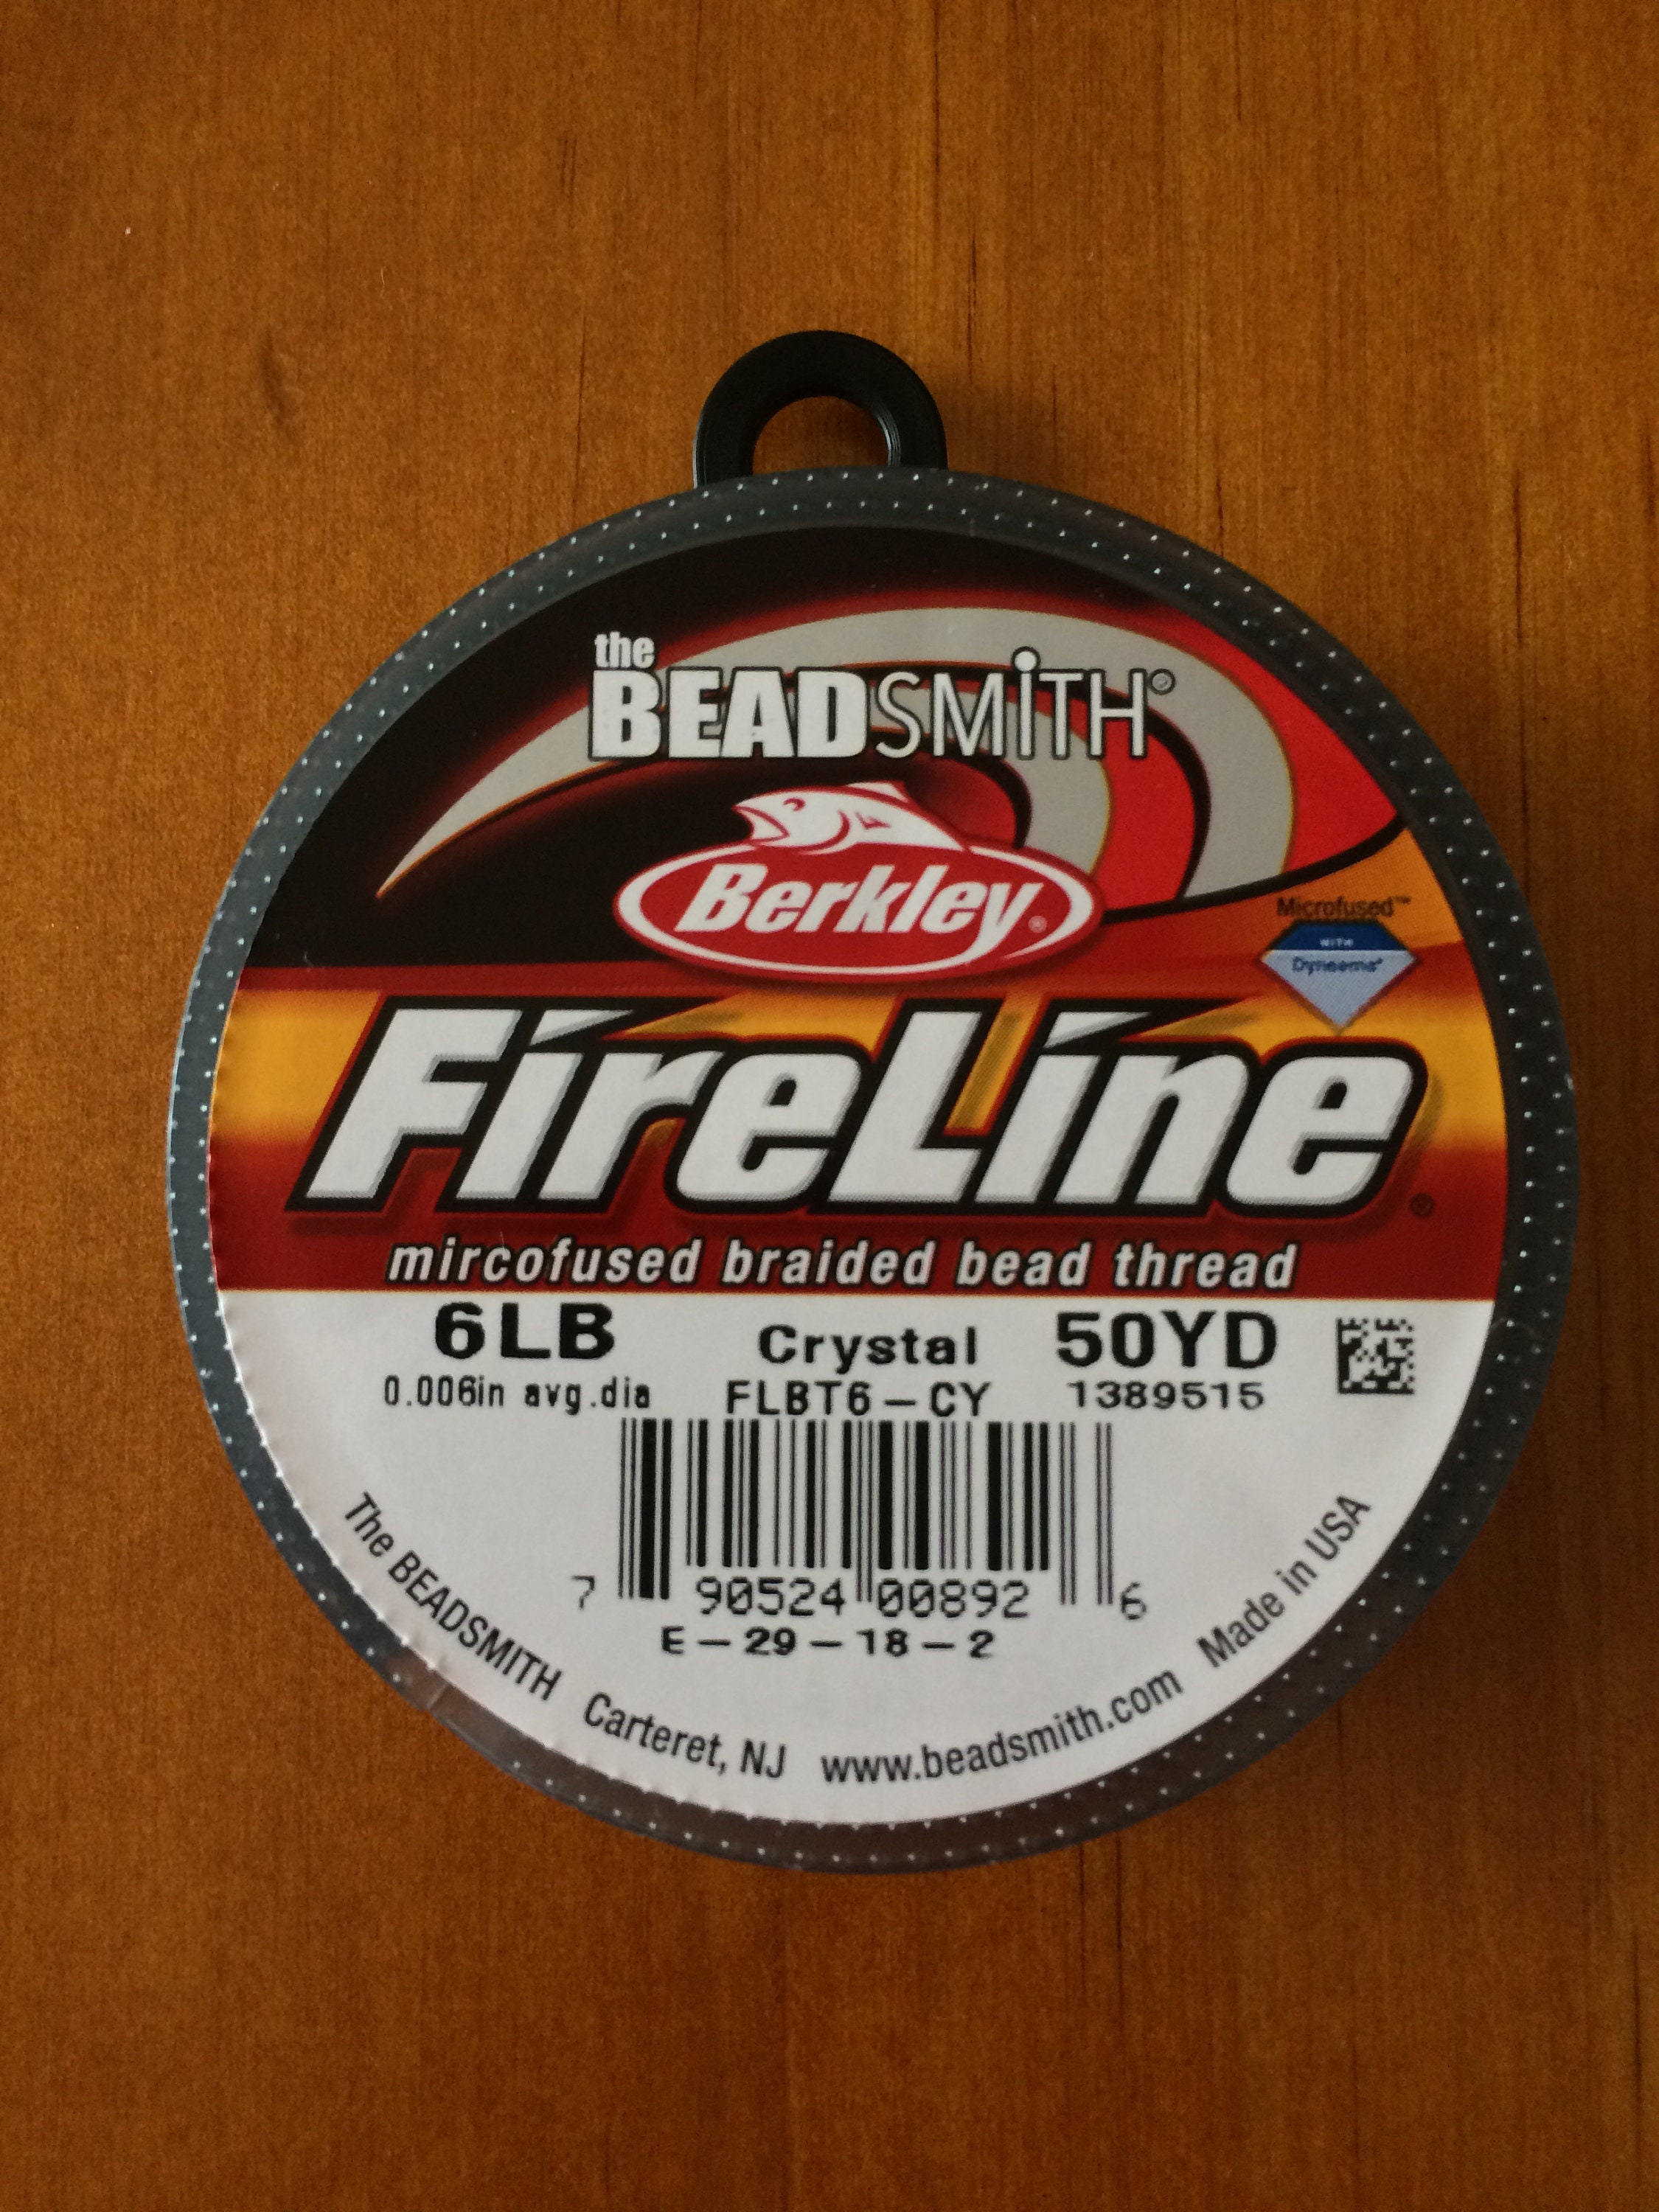 The Beadsmith Fireline by Berkley Micro-Fused Braided Thread 6lb.  Test.006/.15mm Diameter, 125 Yard Spool, Crystal Color Super Strong  Stringing Material for Jewelry Making and Bead Weaving